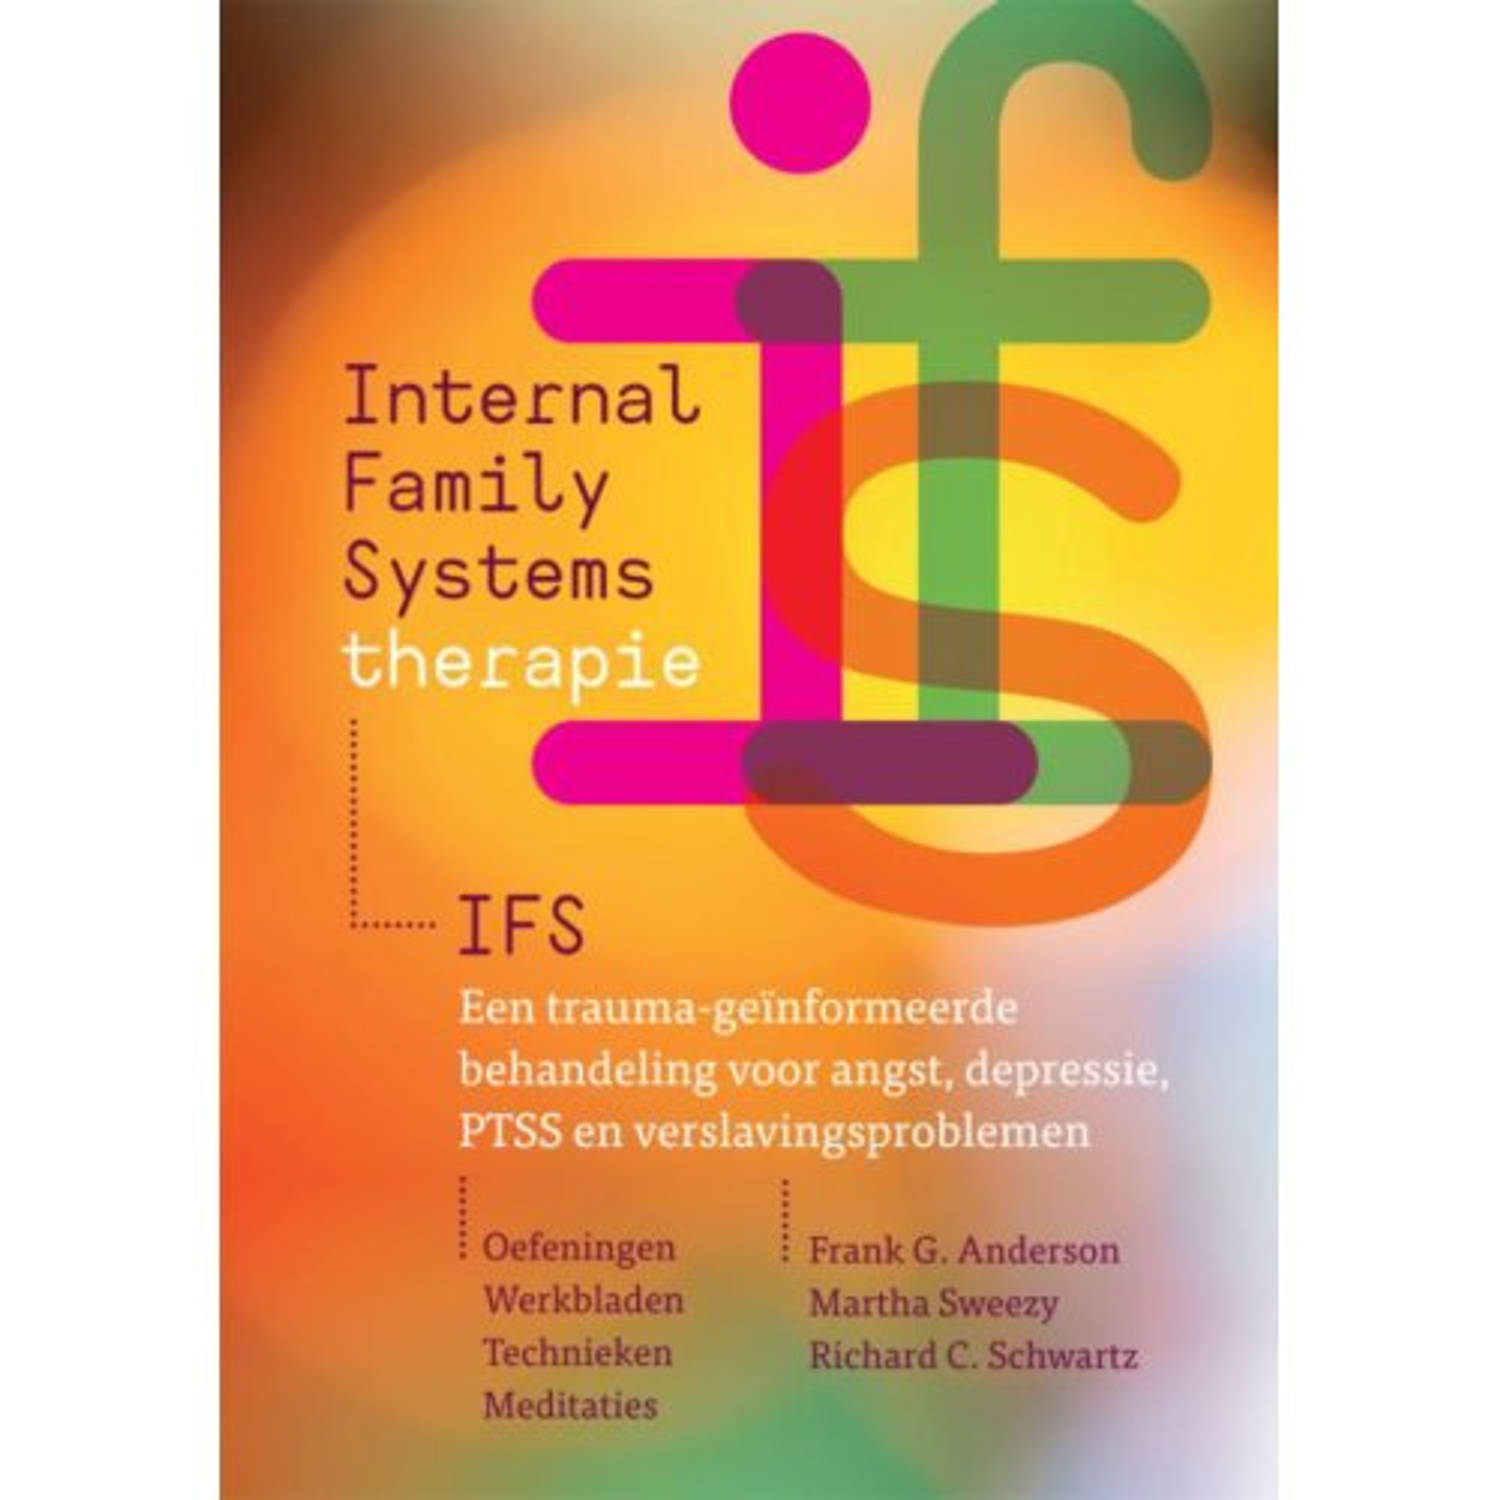 Internal Family Systems-Therapie (Ifs) - (ISBN:9789463160513)